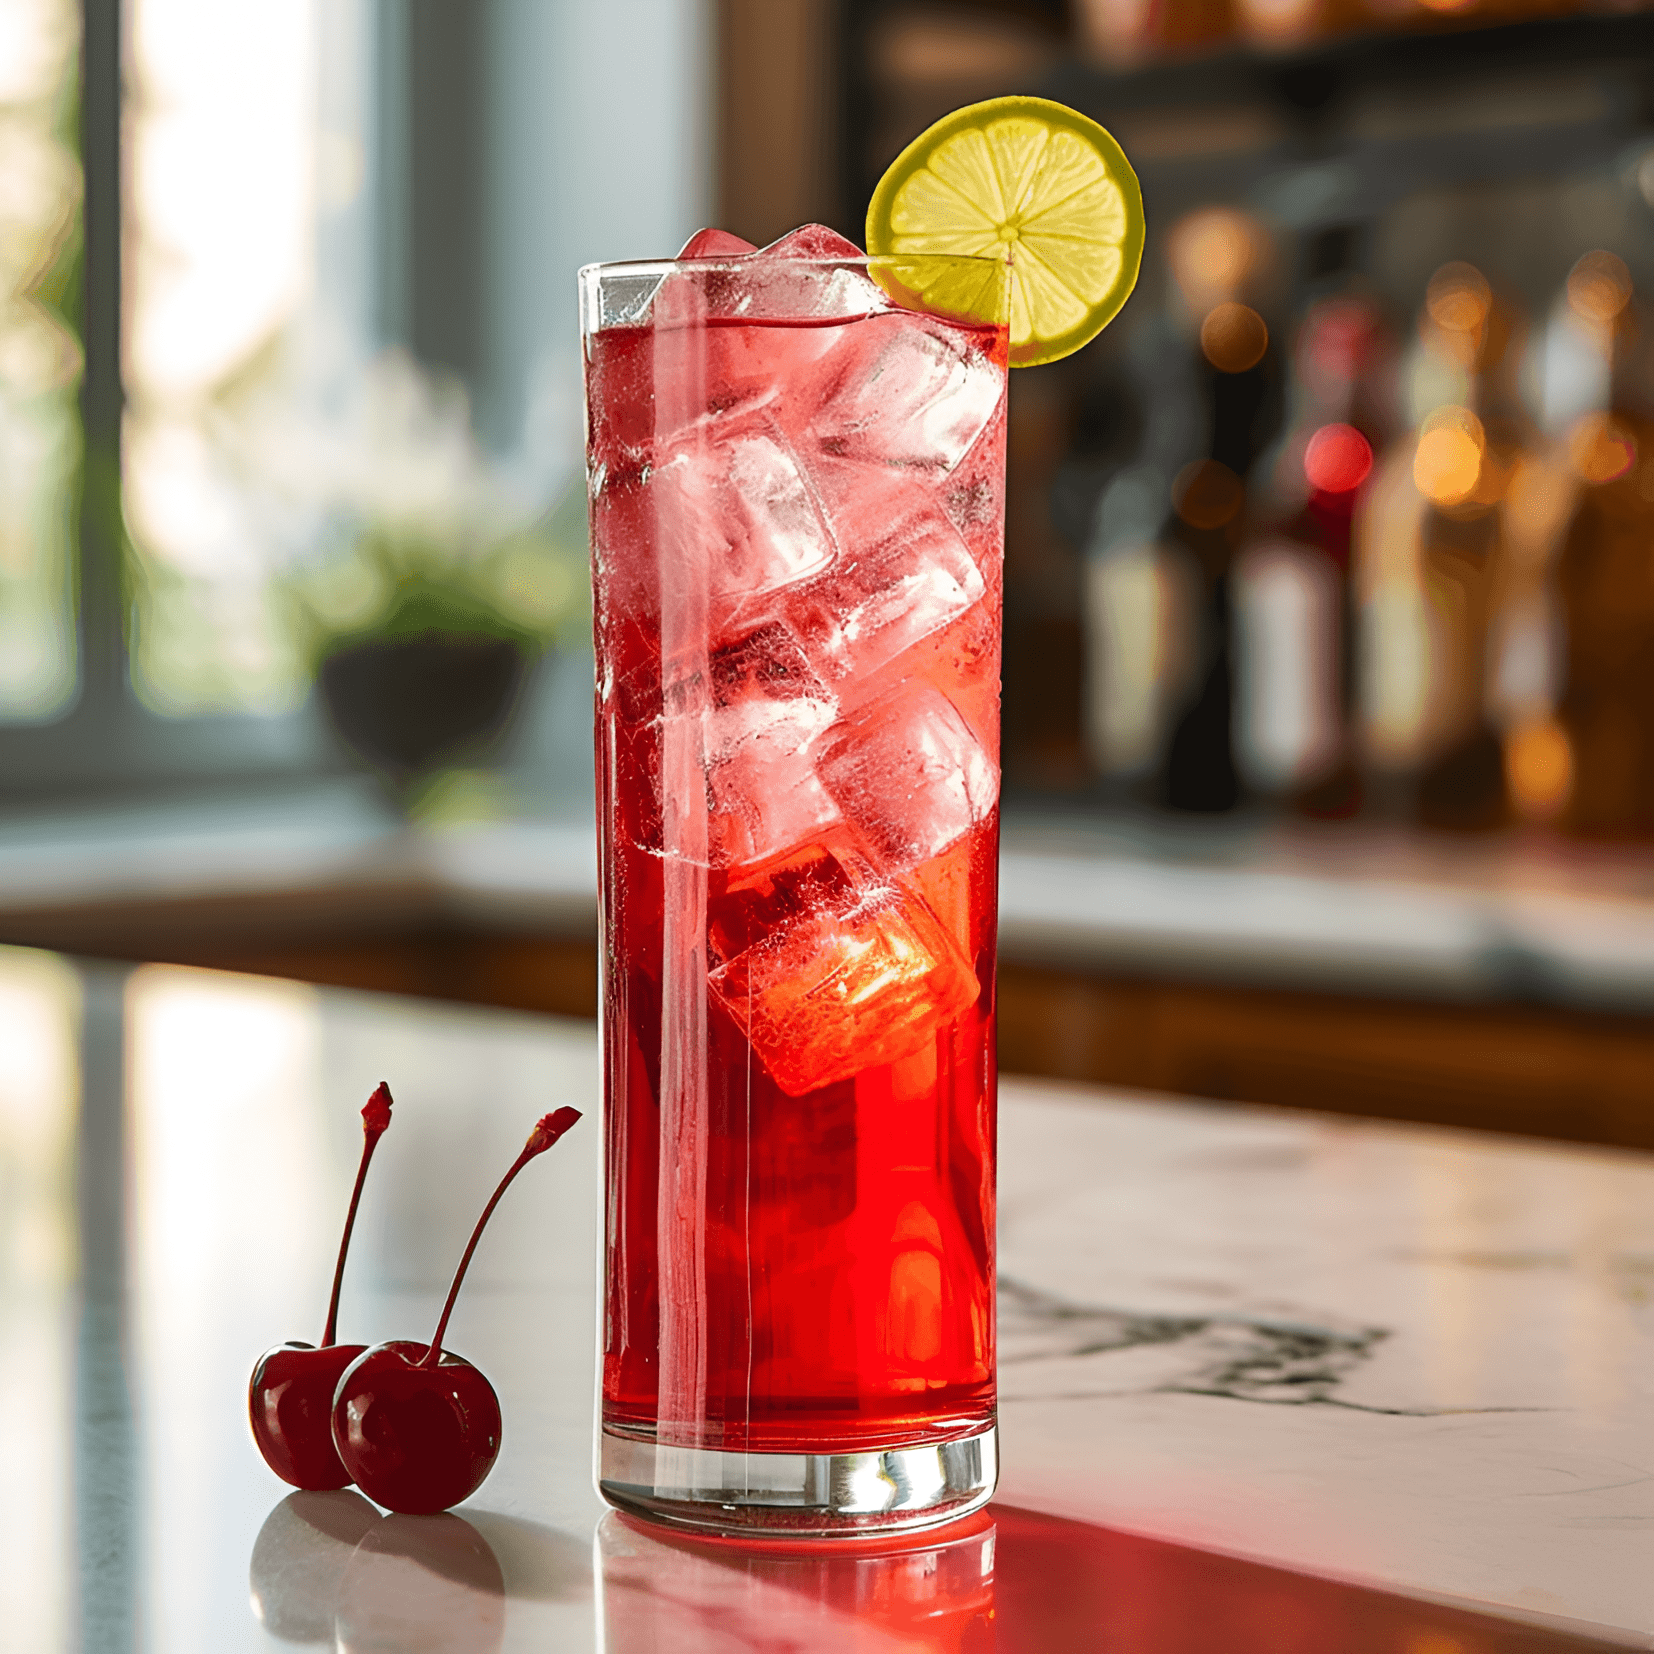 The Shirley Temple cocktail is sweet, refreshing, and slightly tangy. The combination of ginger ale, grenadine, and lemon-lime soda creates a delightful balance of flavors that is both satisfying and thirst-quenching.